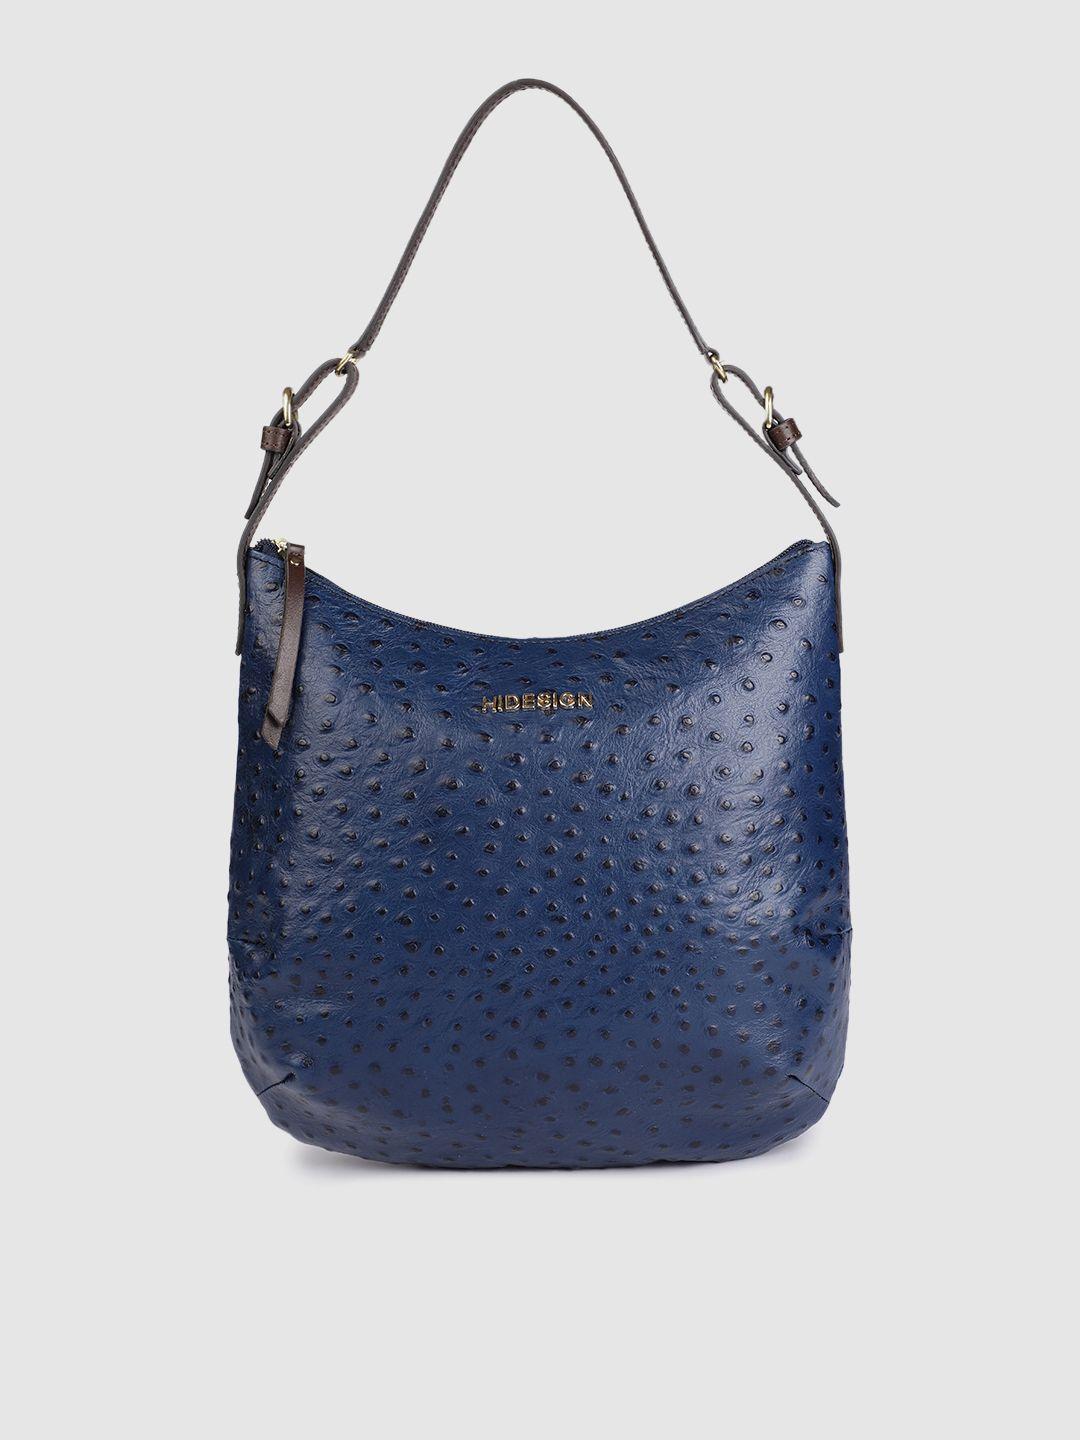 hidesign blue textured leather structured hobo bag